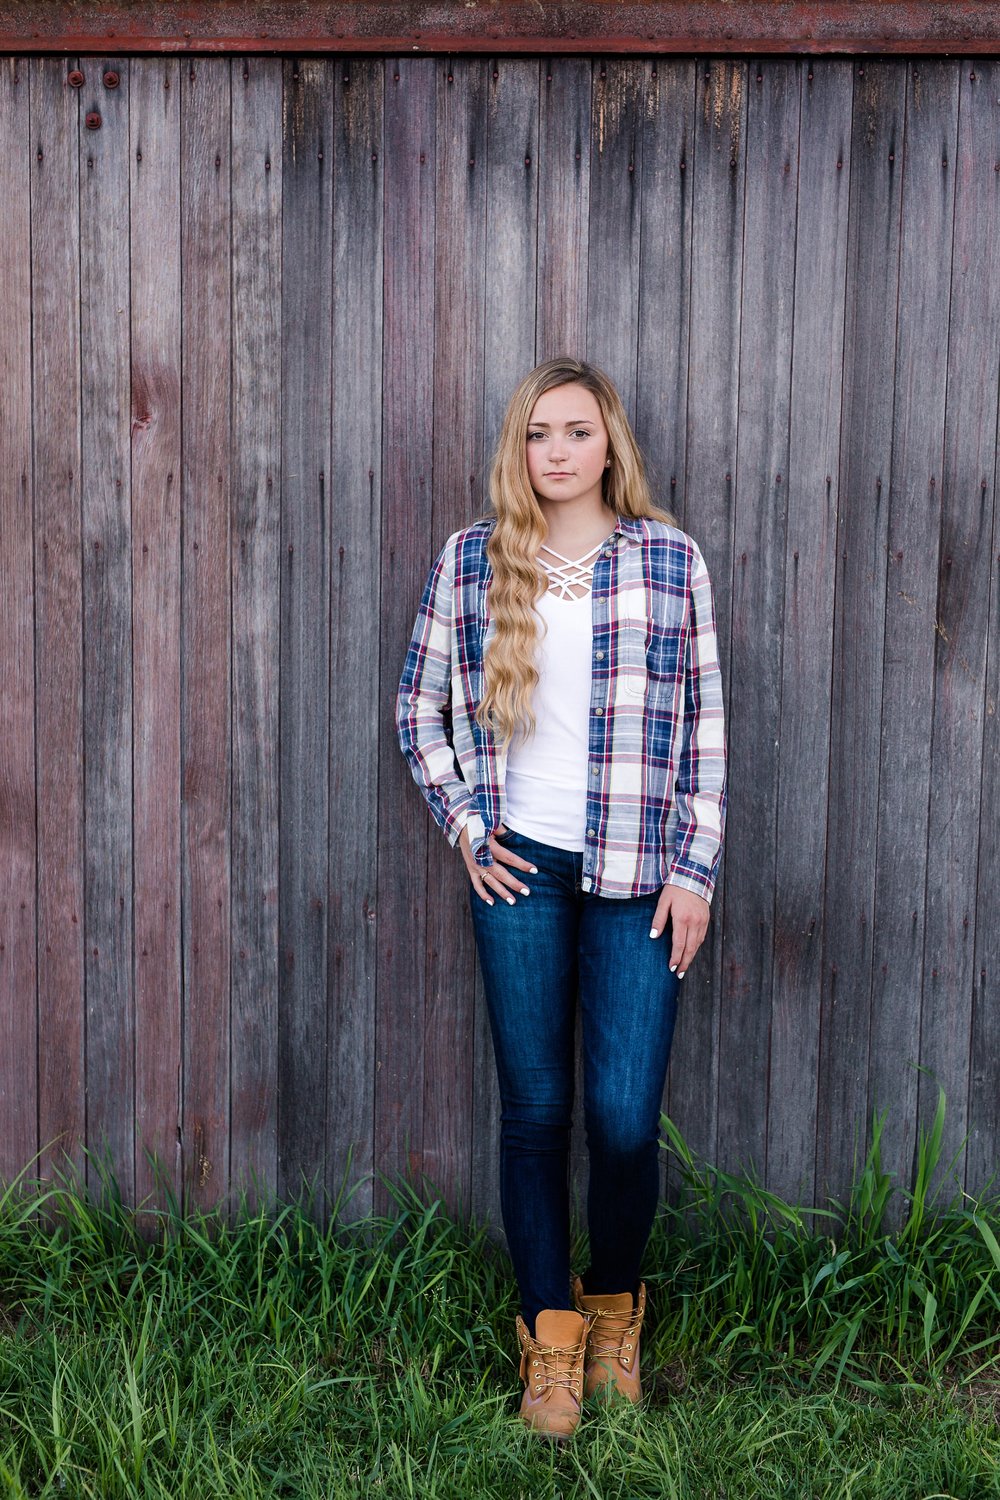 Country Styled High School Senior Pictures on a Farm and Little Cormorant Lake in Minnesota by Amber Langerud with Rustic Barn Wood